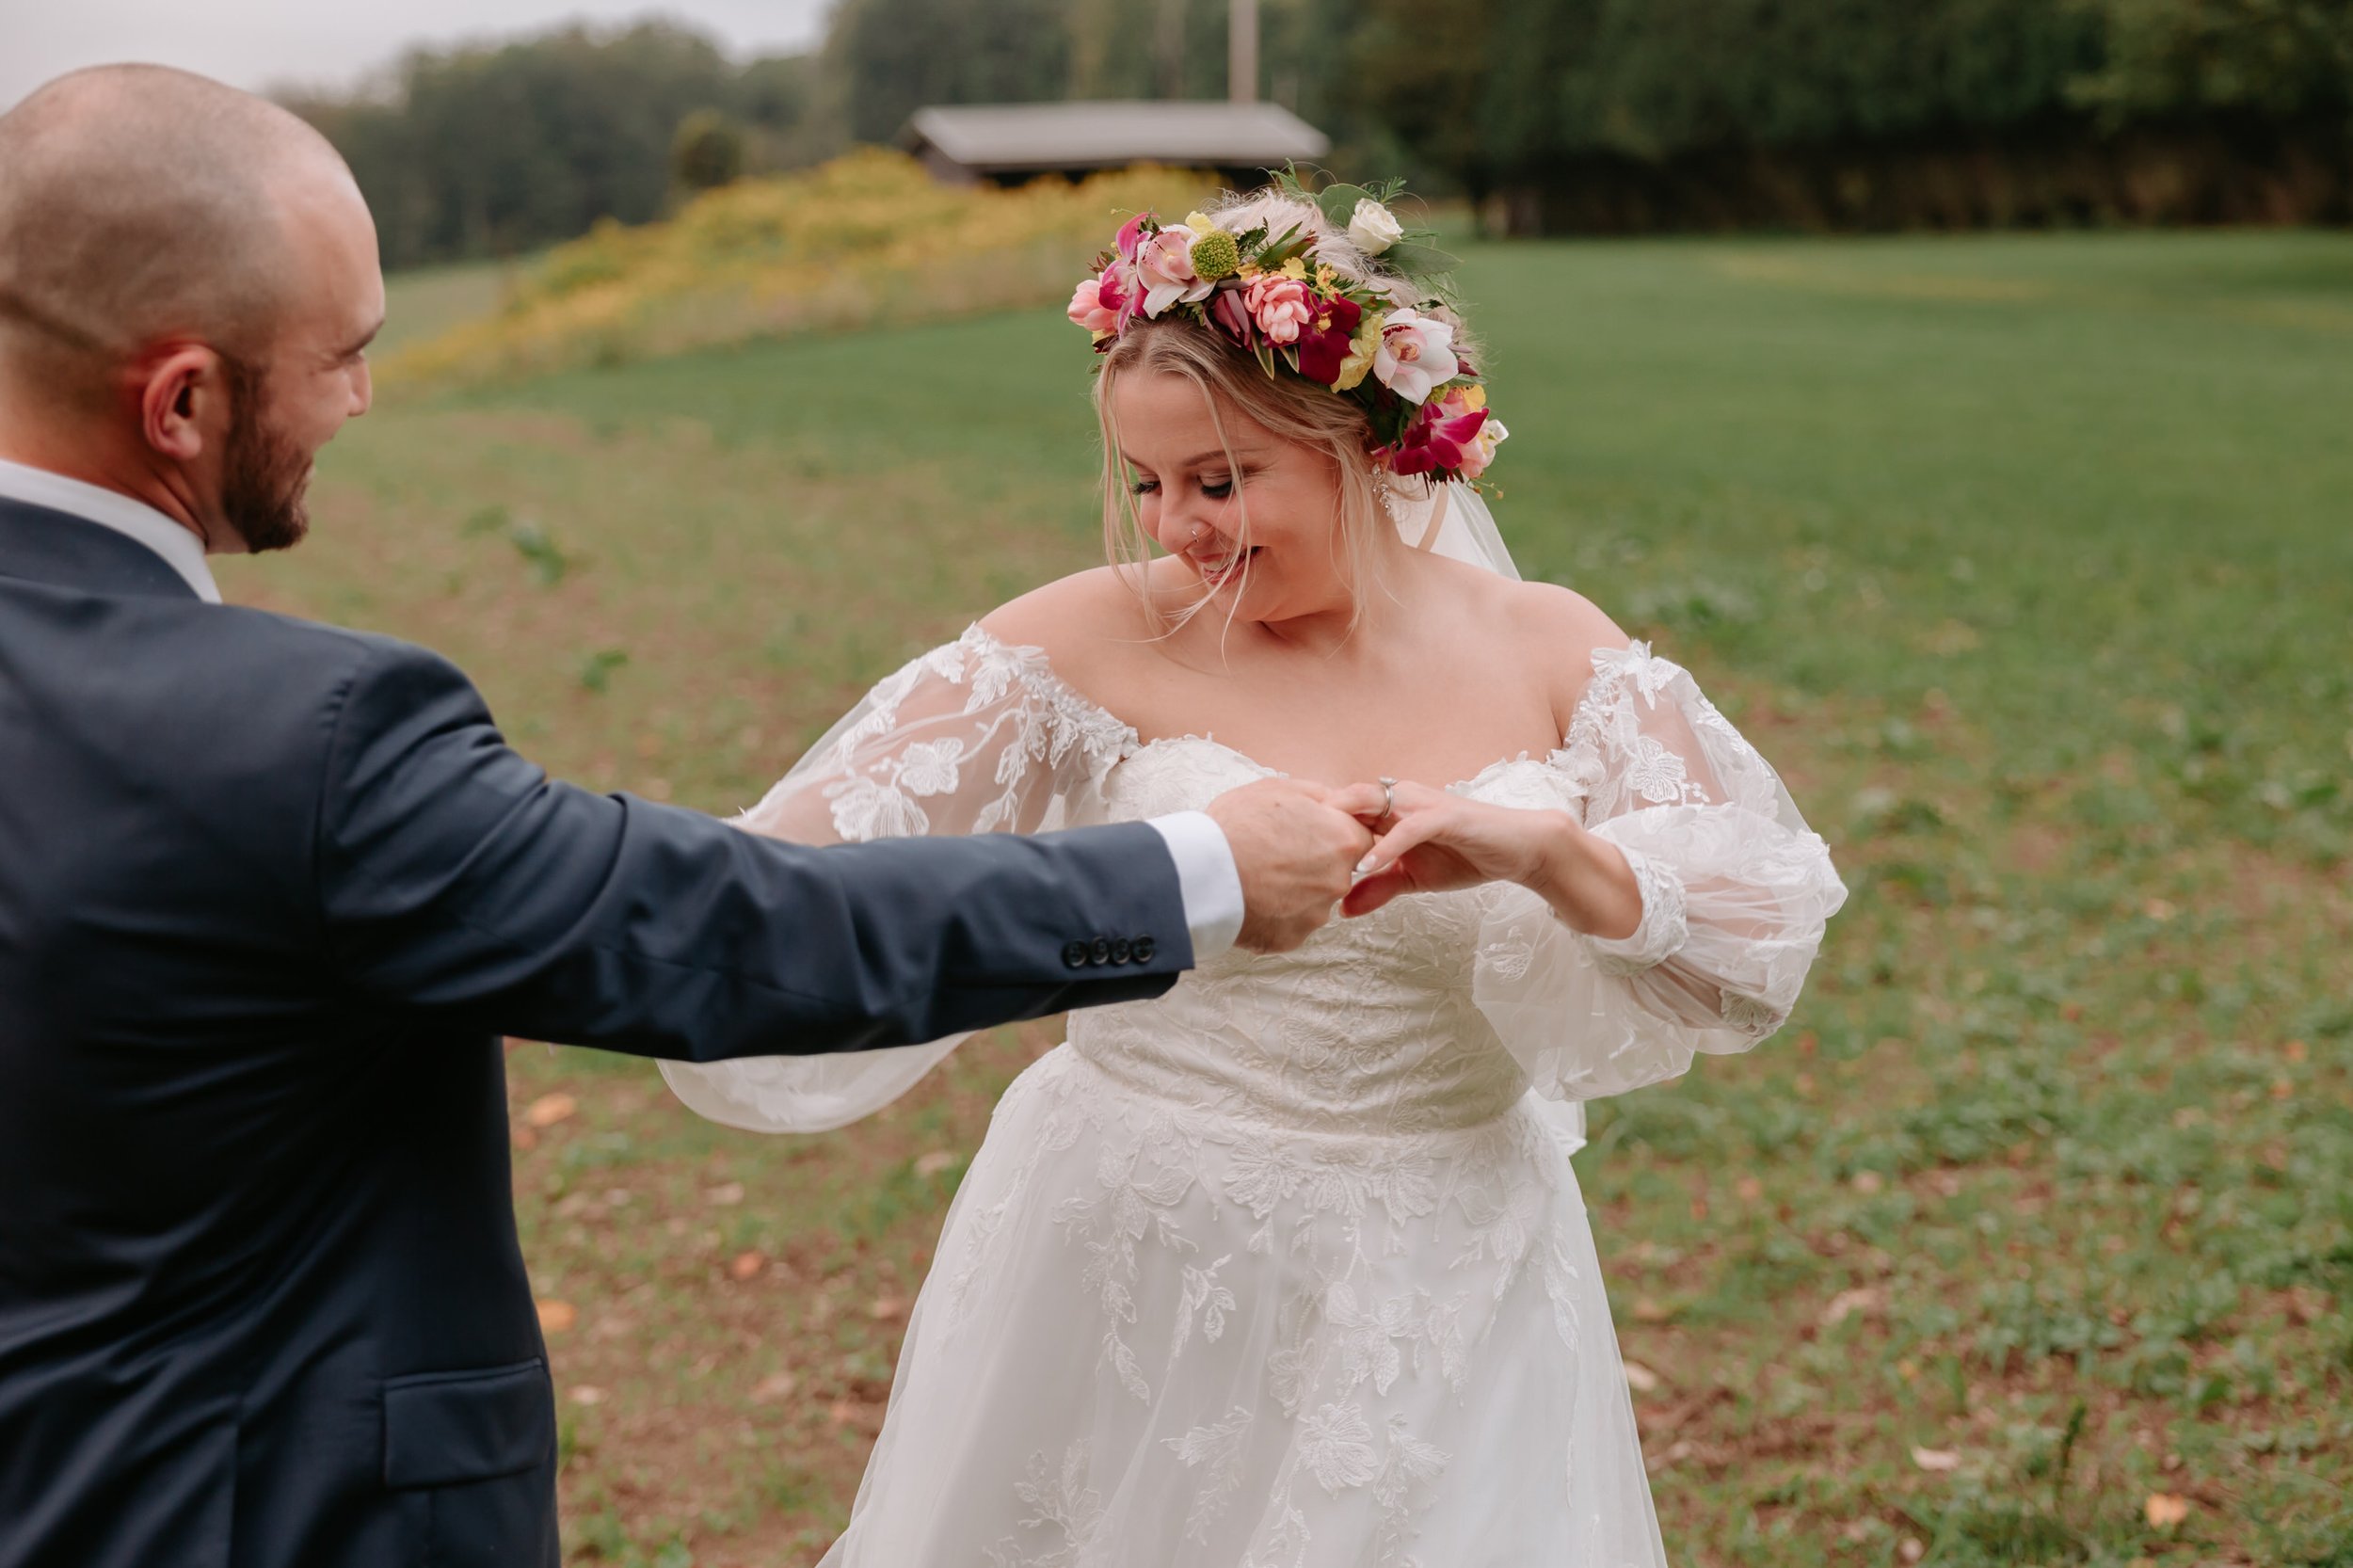 A bride and groom dancing in a field.